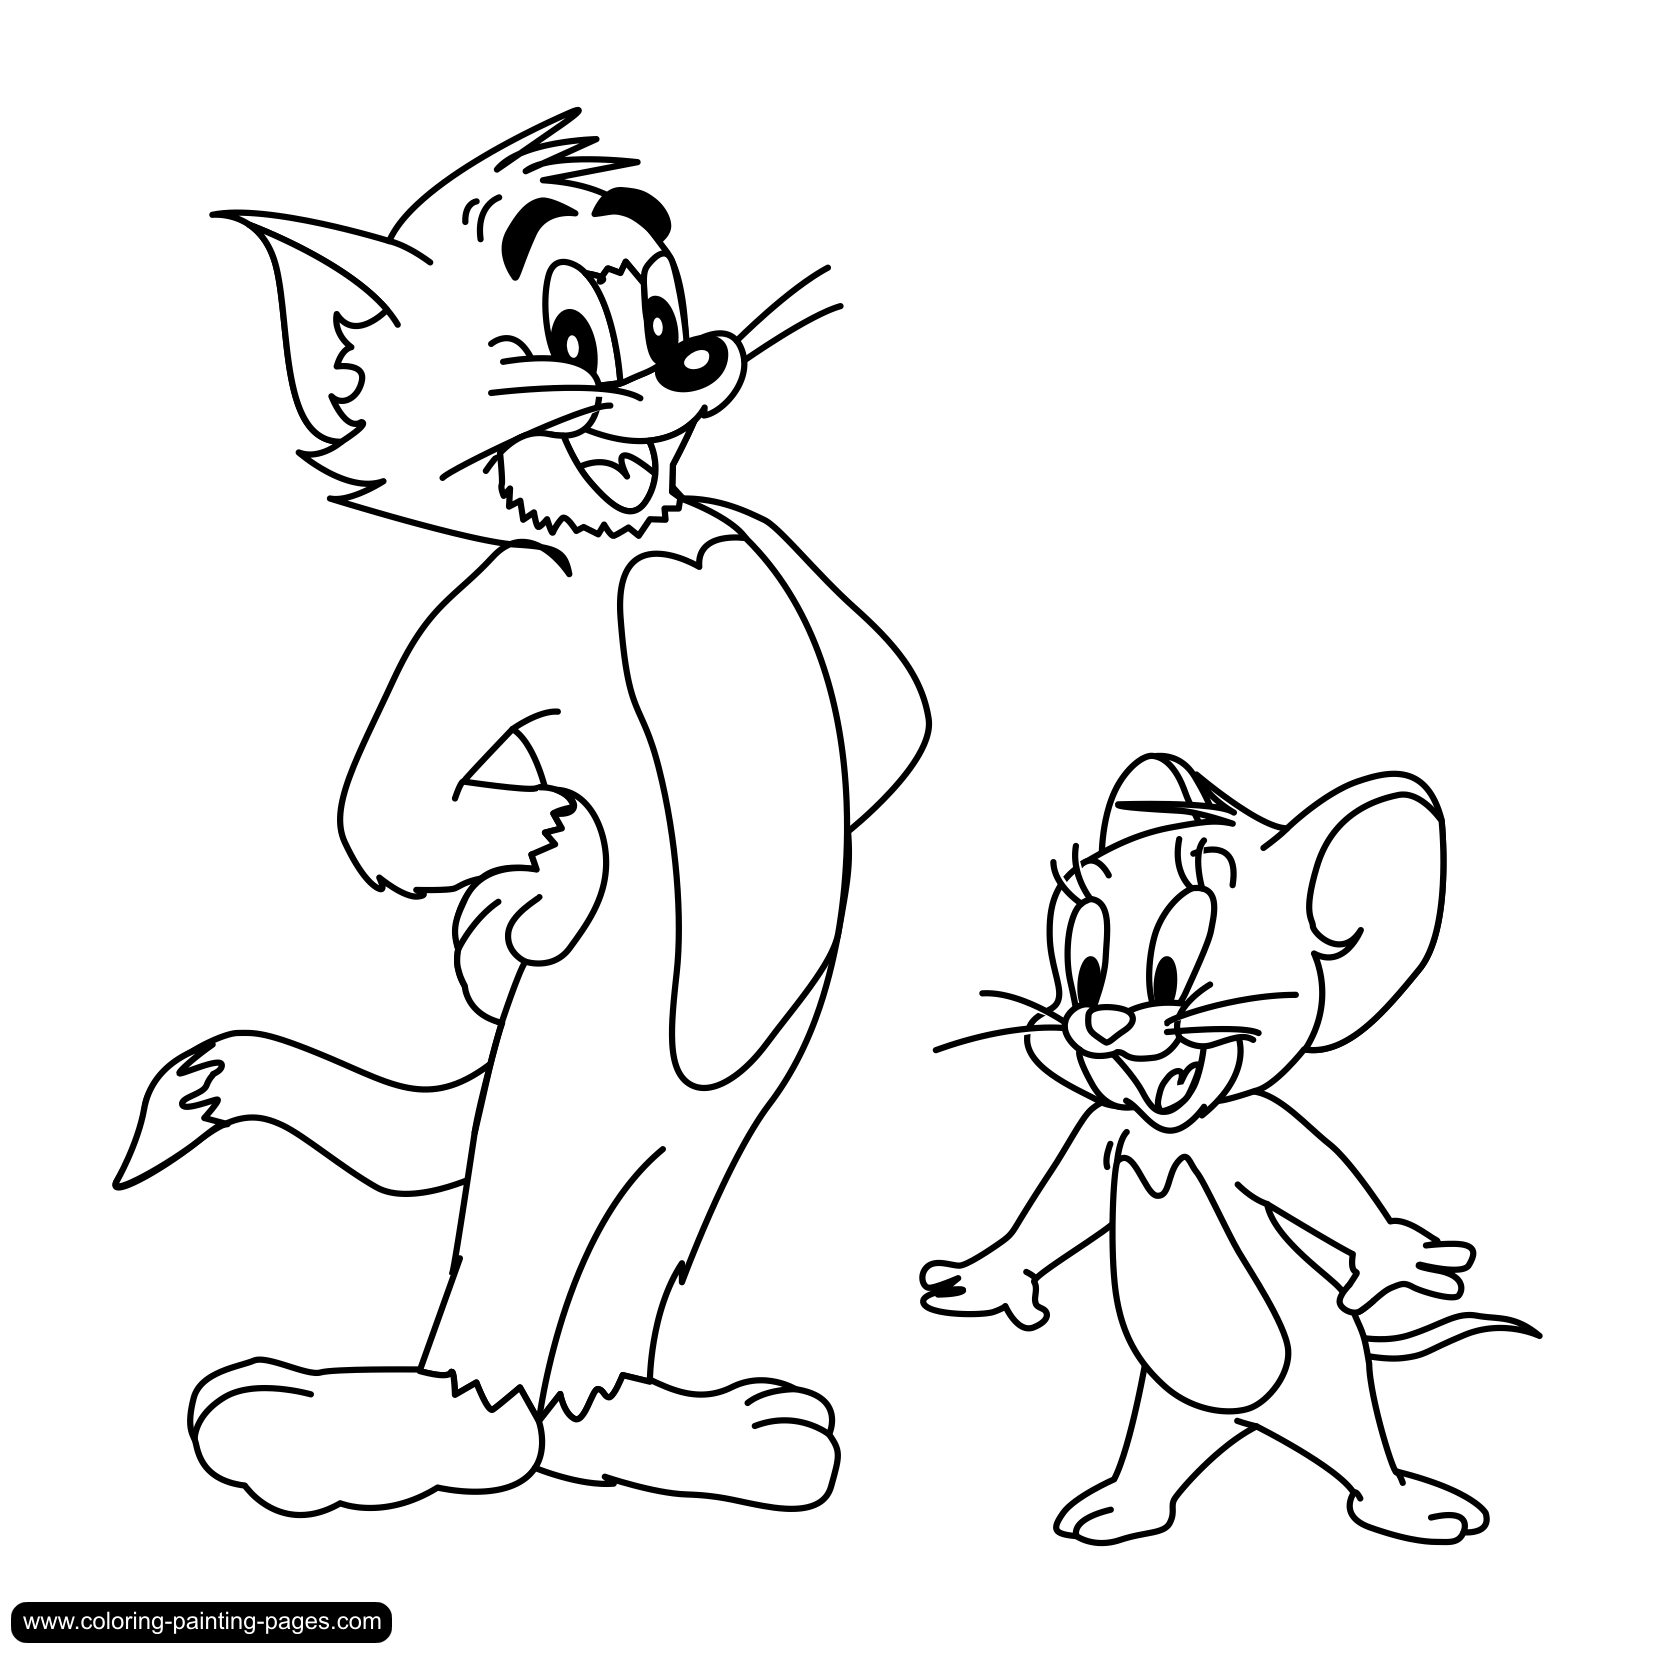 12 coloring pictures tom and jerry - Print Color Craft